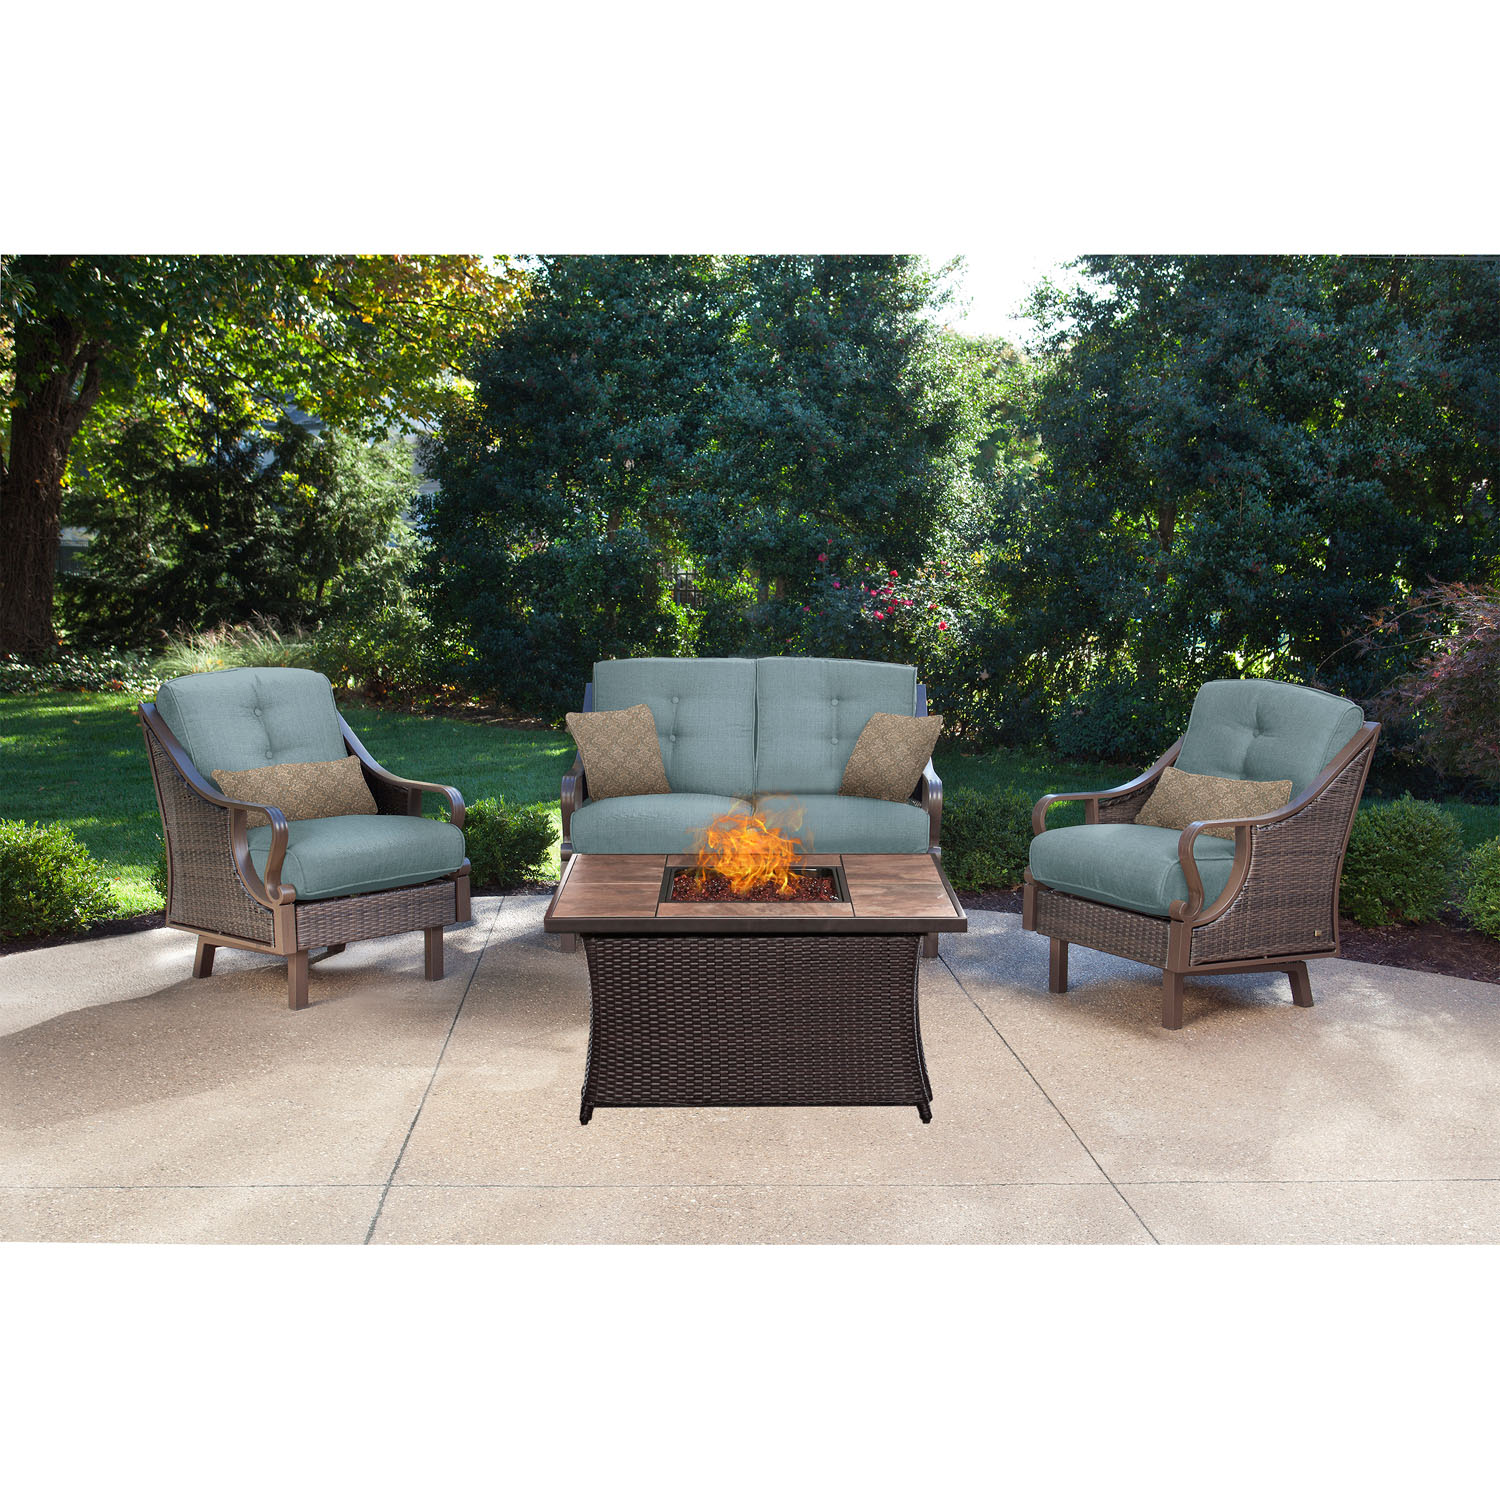 Hanover Ventura 4 Pcs Wicker and Steel Propane Fire Pit Chat Set, Ocean Blue - image 2 of 10